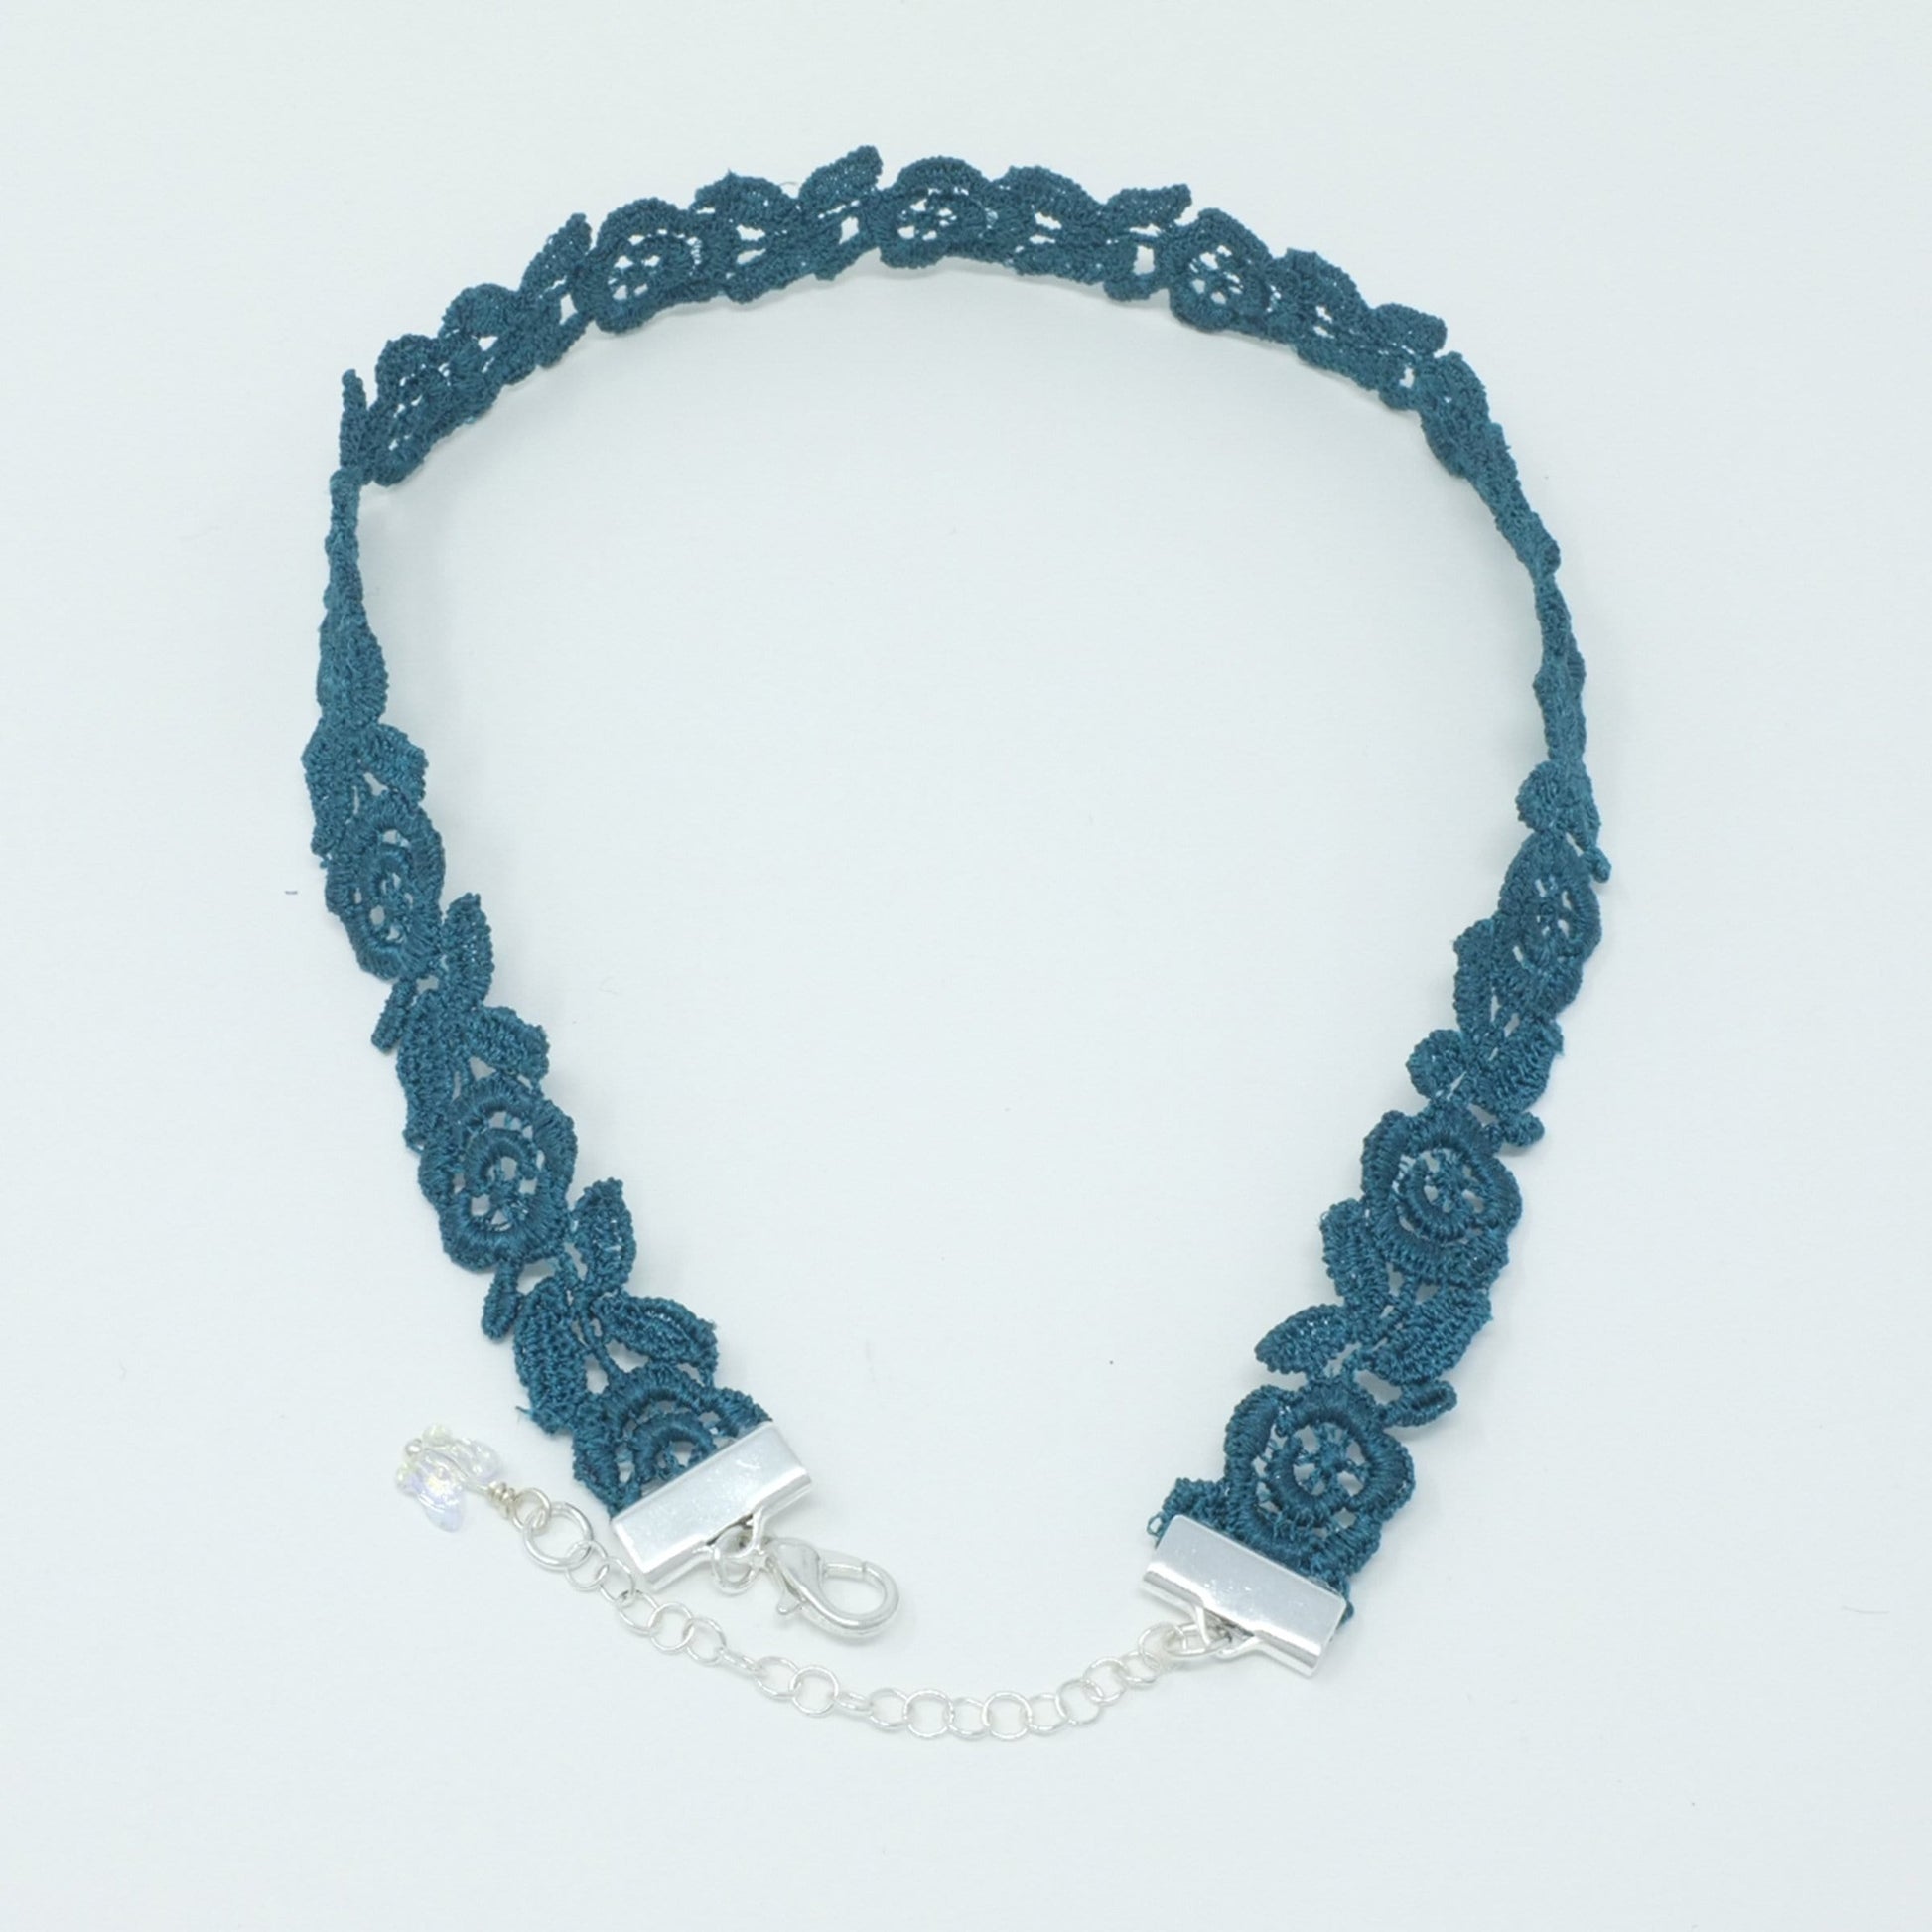 Blue-green rose choker with metal clasp closure